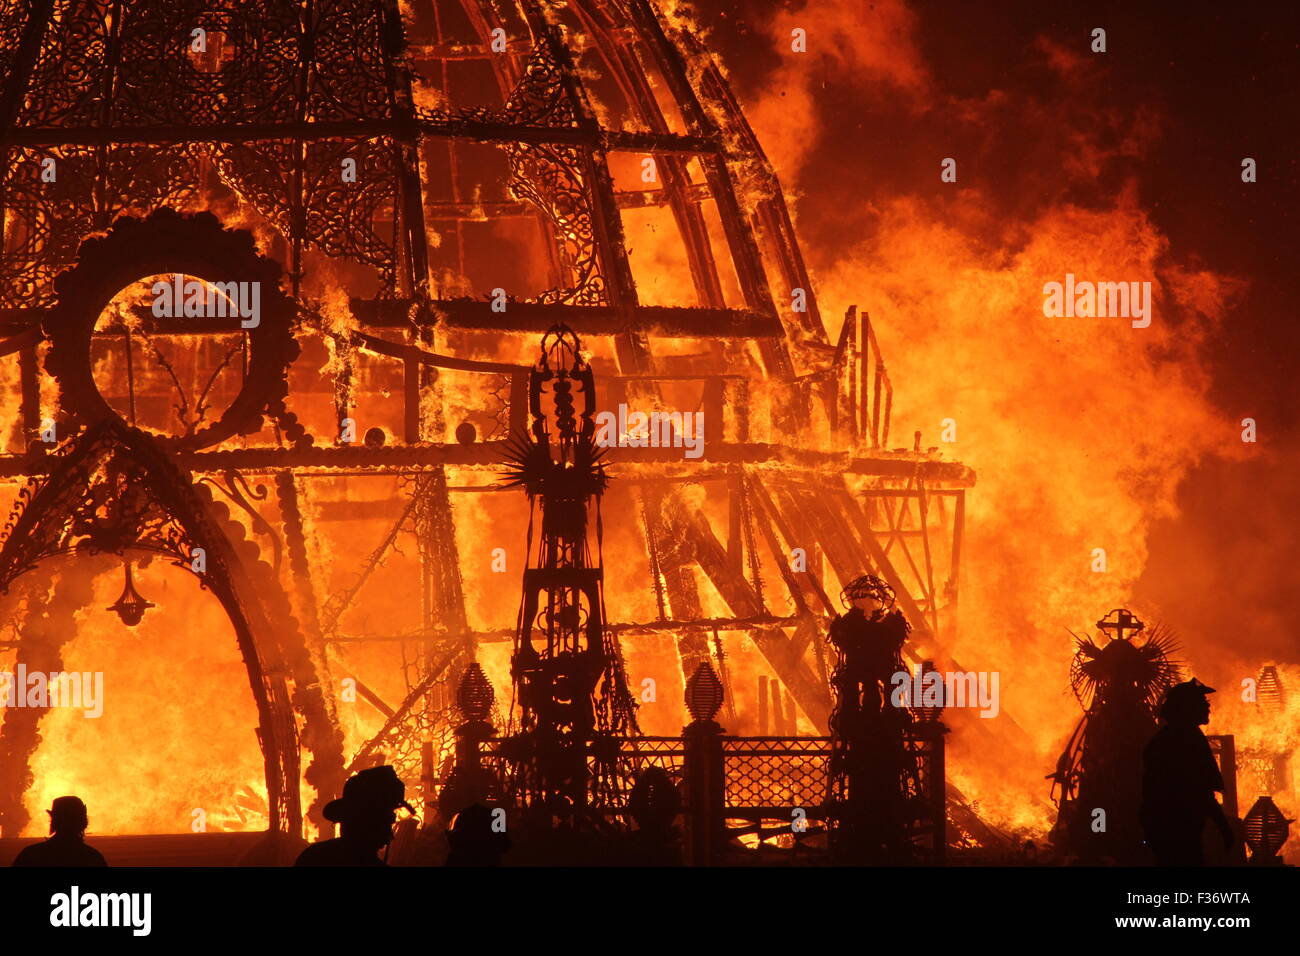 The Burning Man goes up in flames on the final night in the playa during the annual Burning Man festival in the desert August 31, 2014 in Black Rock City, Nevada. Stock Photo